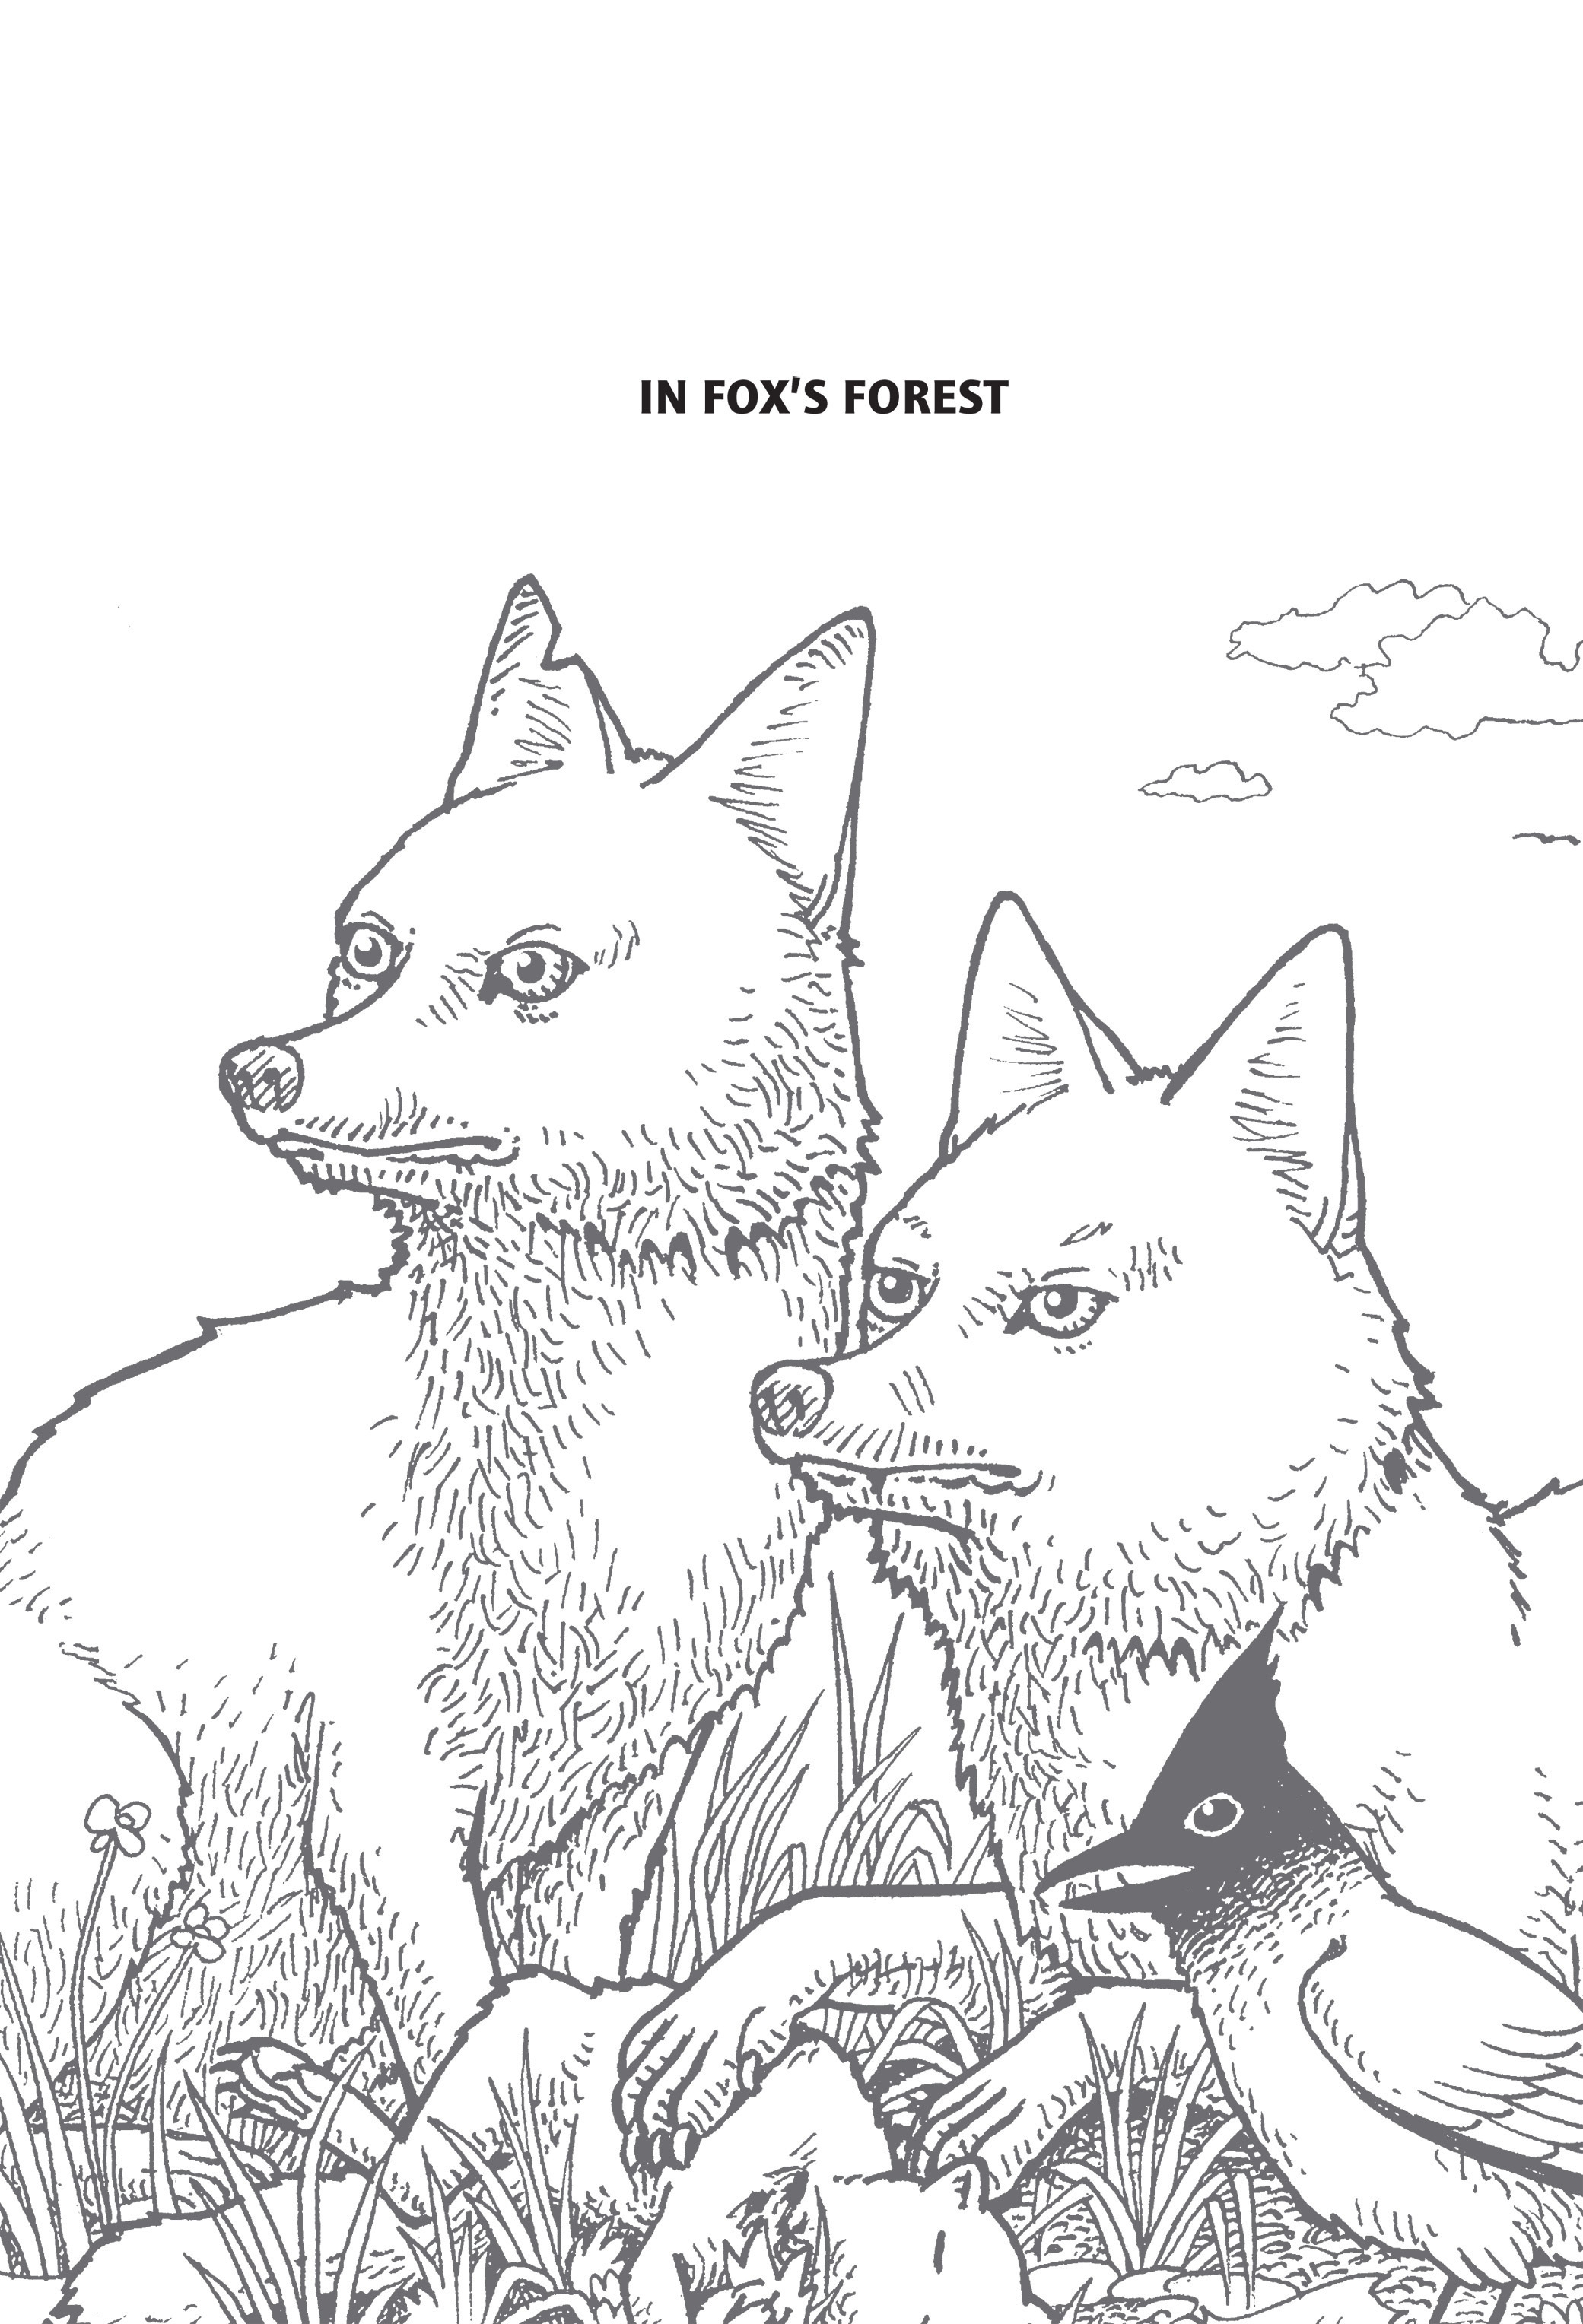 Read online In Fox's Forest comic -  Issue # TPB - 2